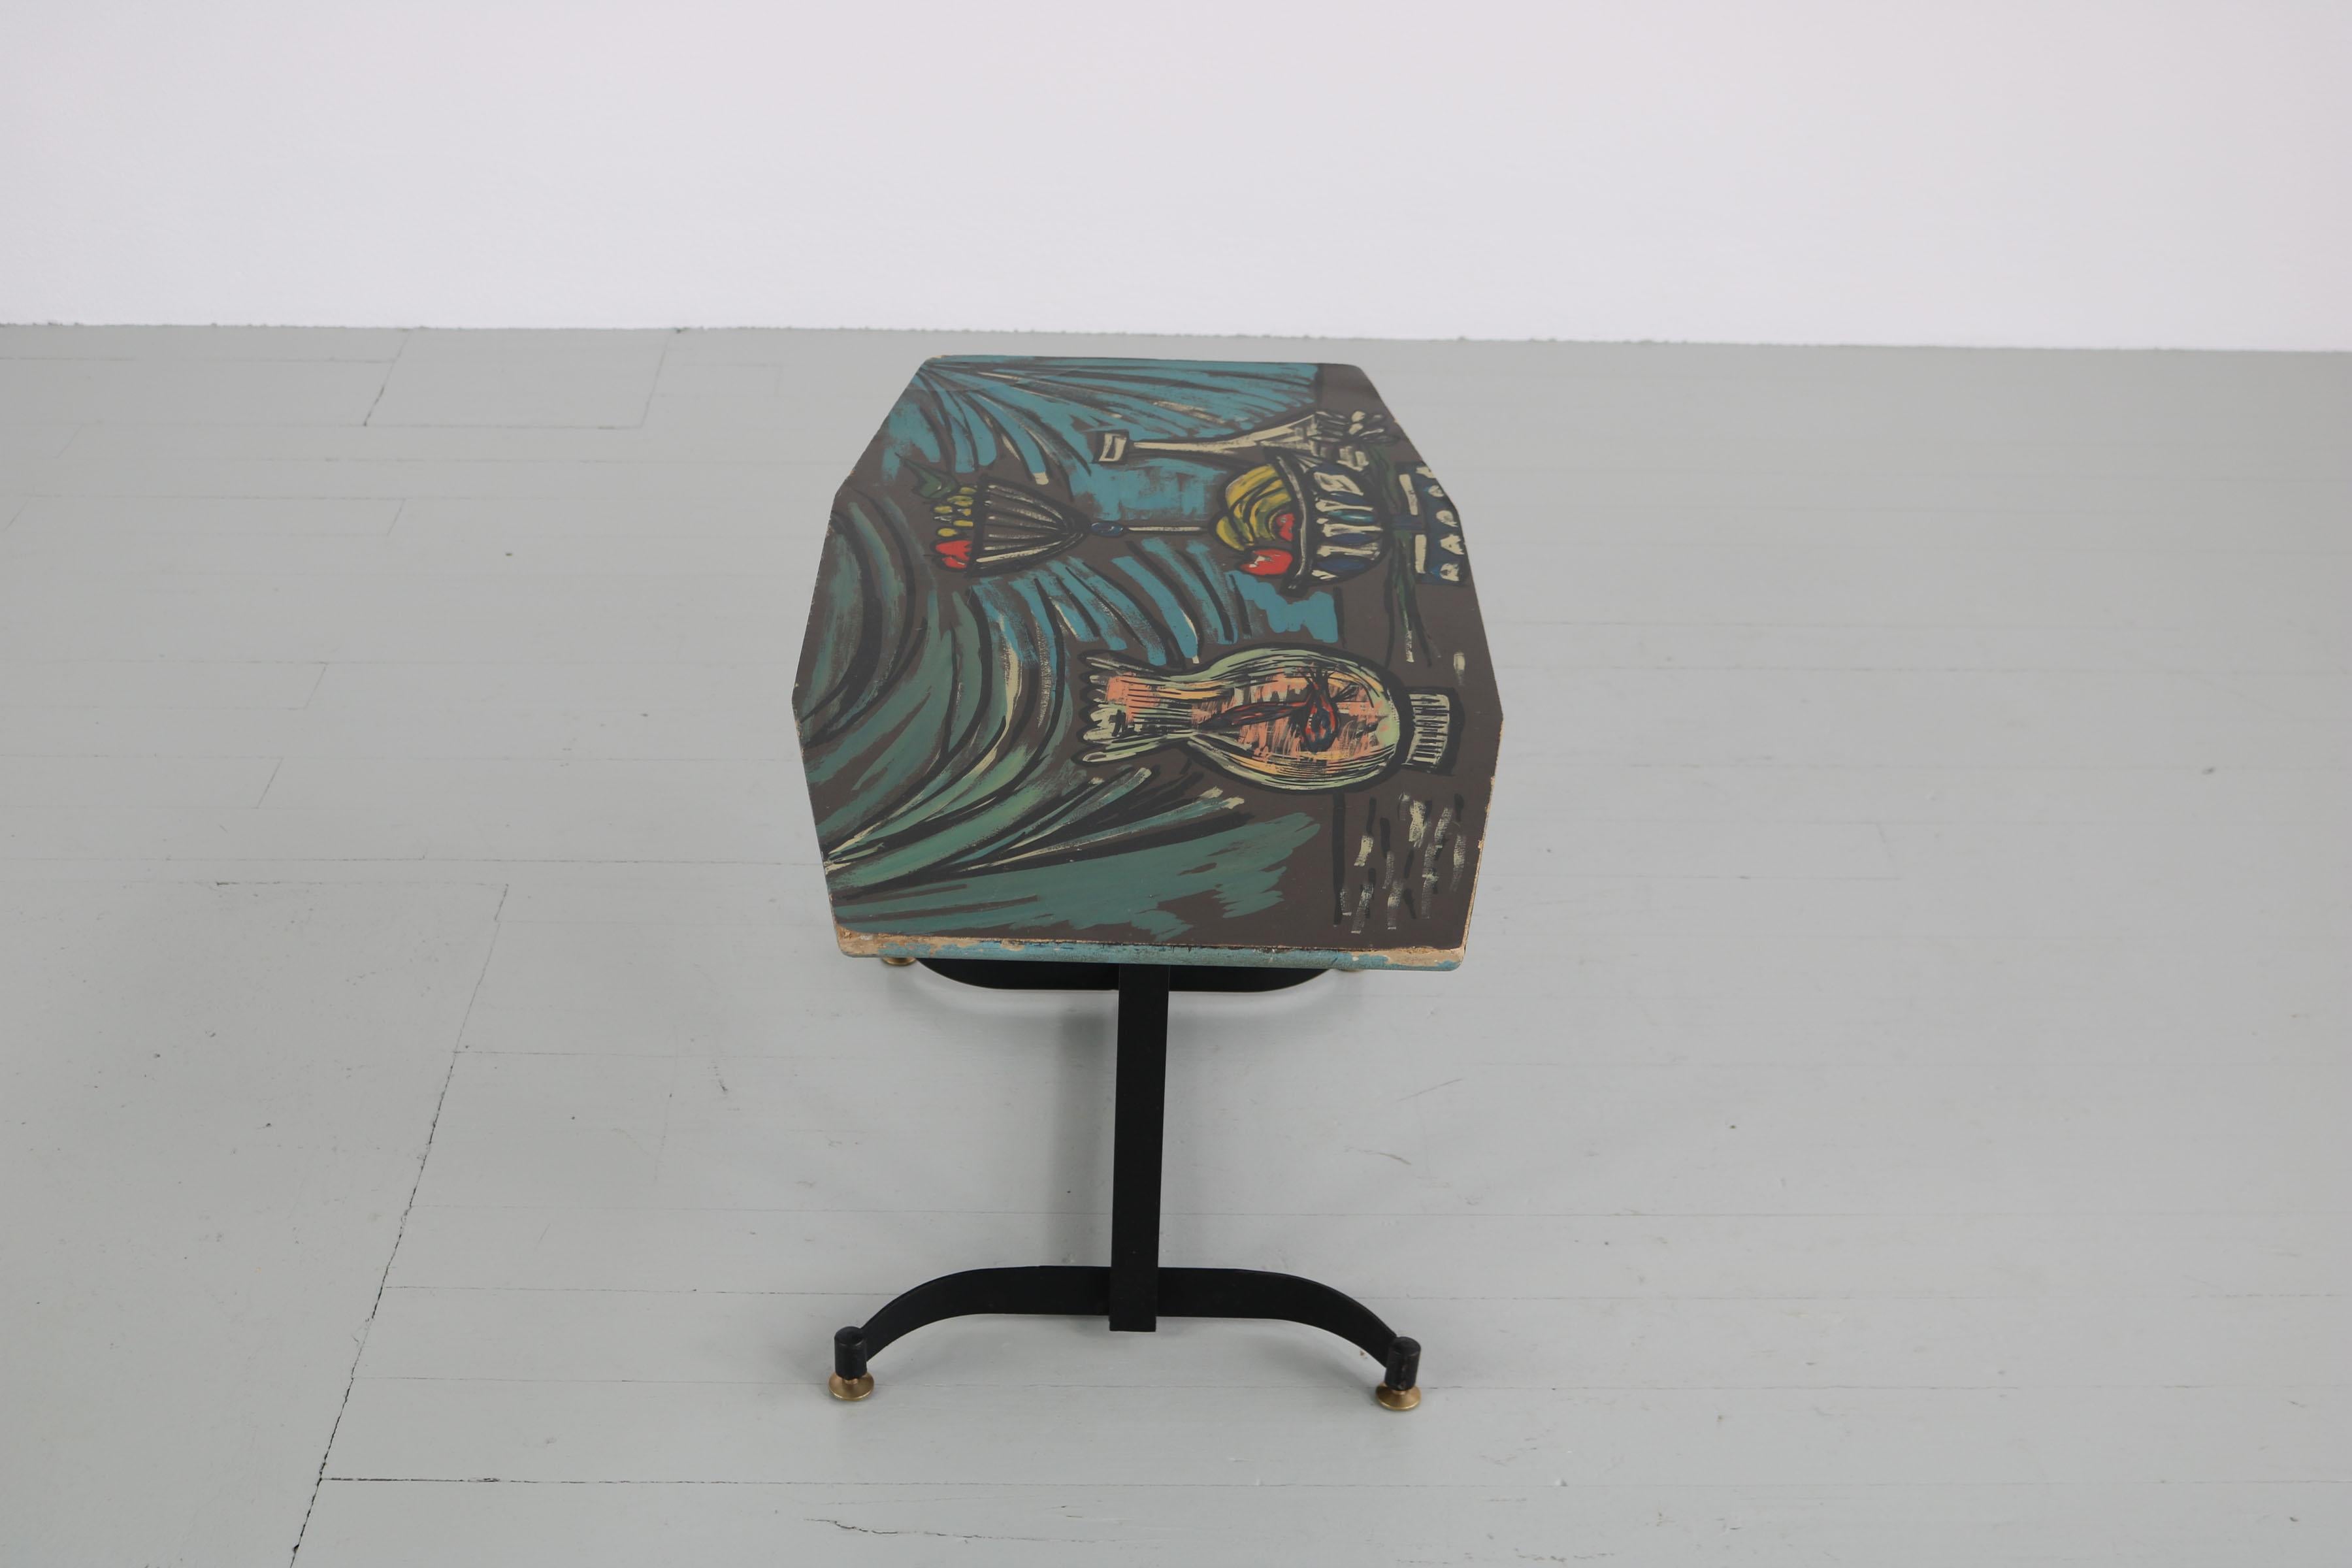 Italian Dark Sofa Table with Colorful Hand-Painted Motives on Table Top, 1950s For Sale 8